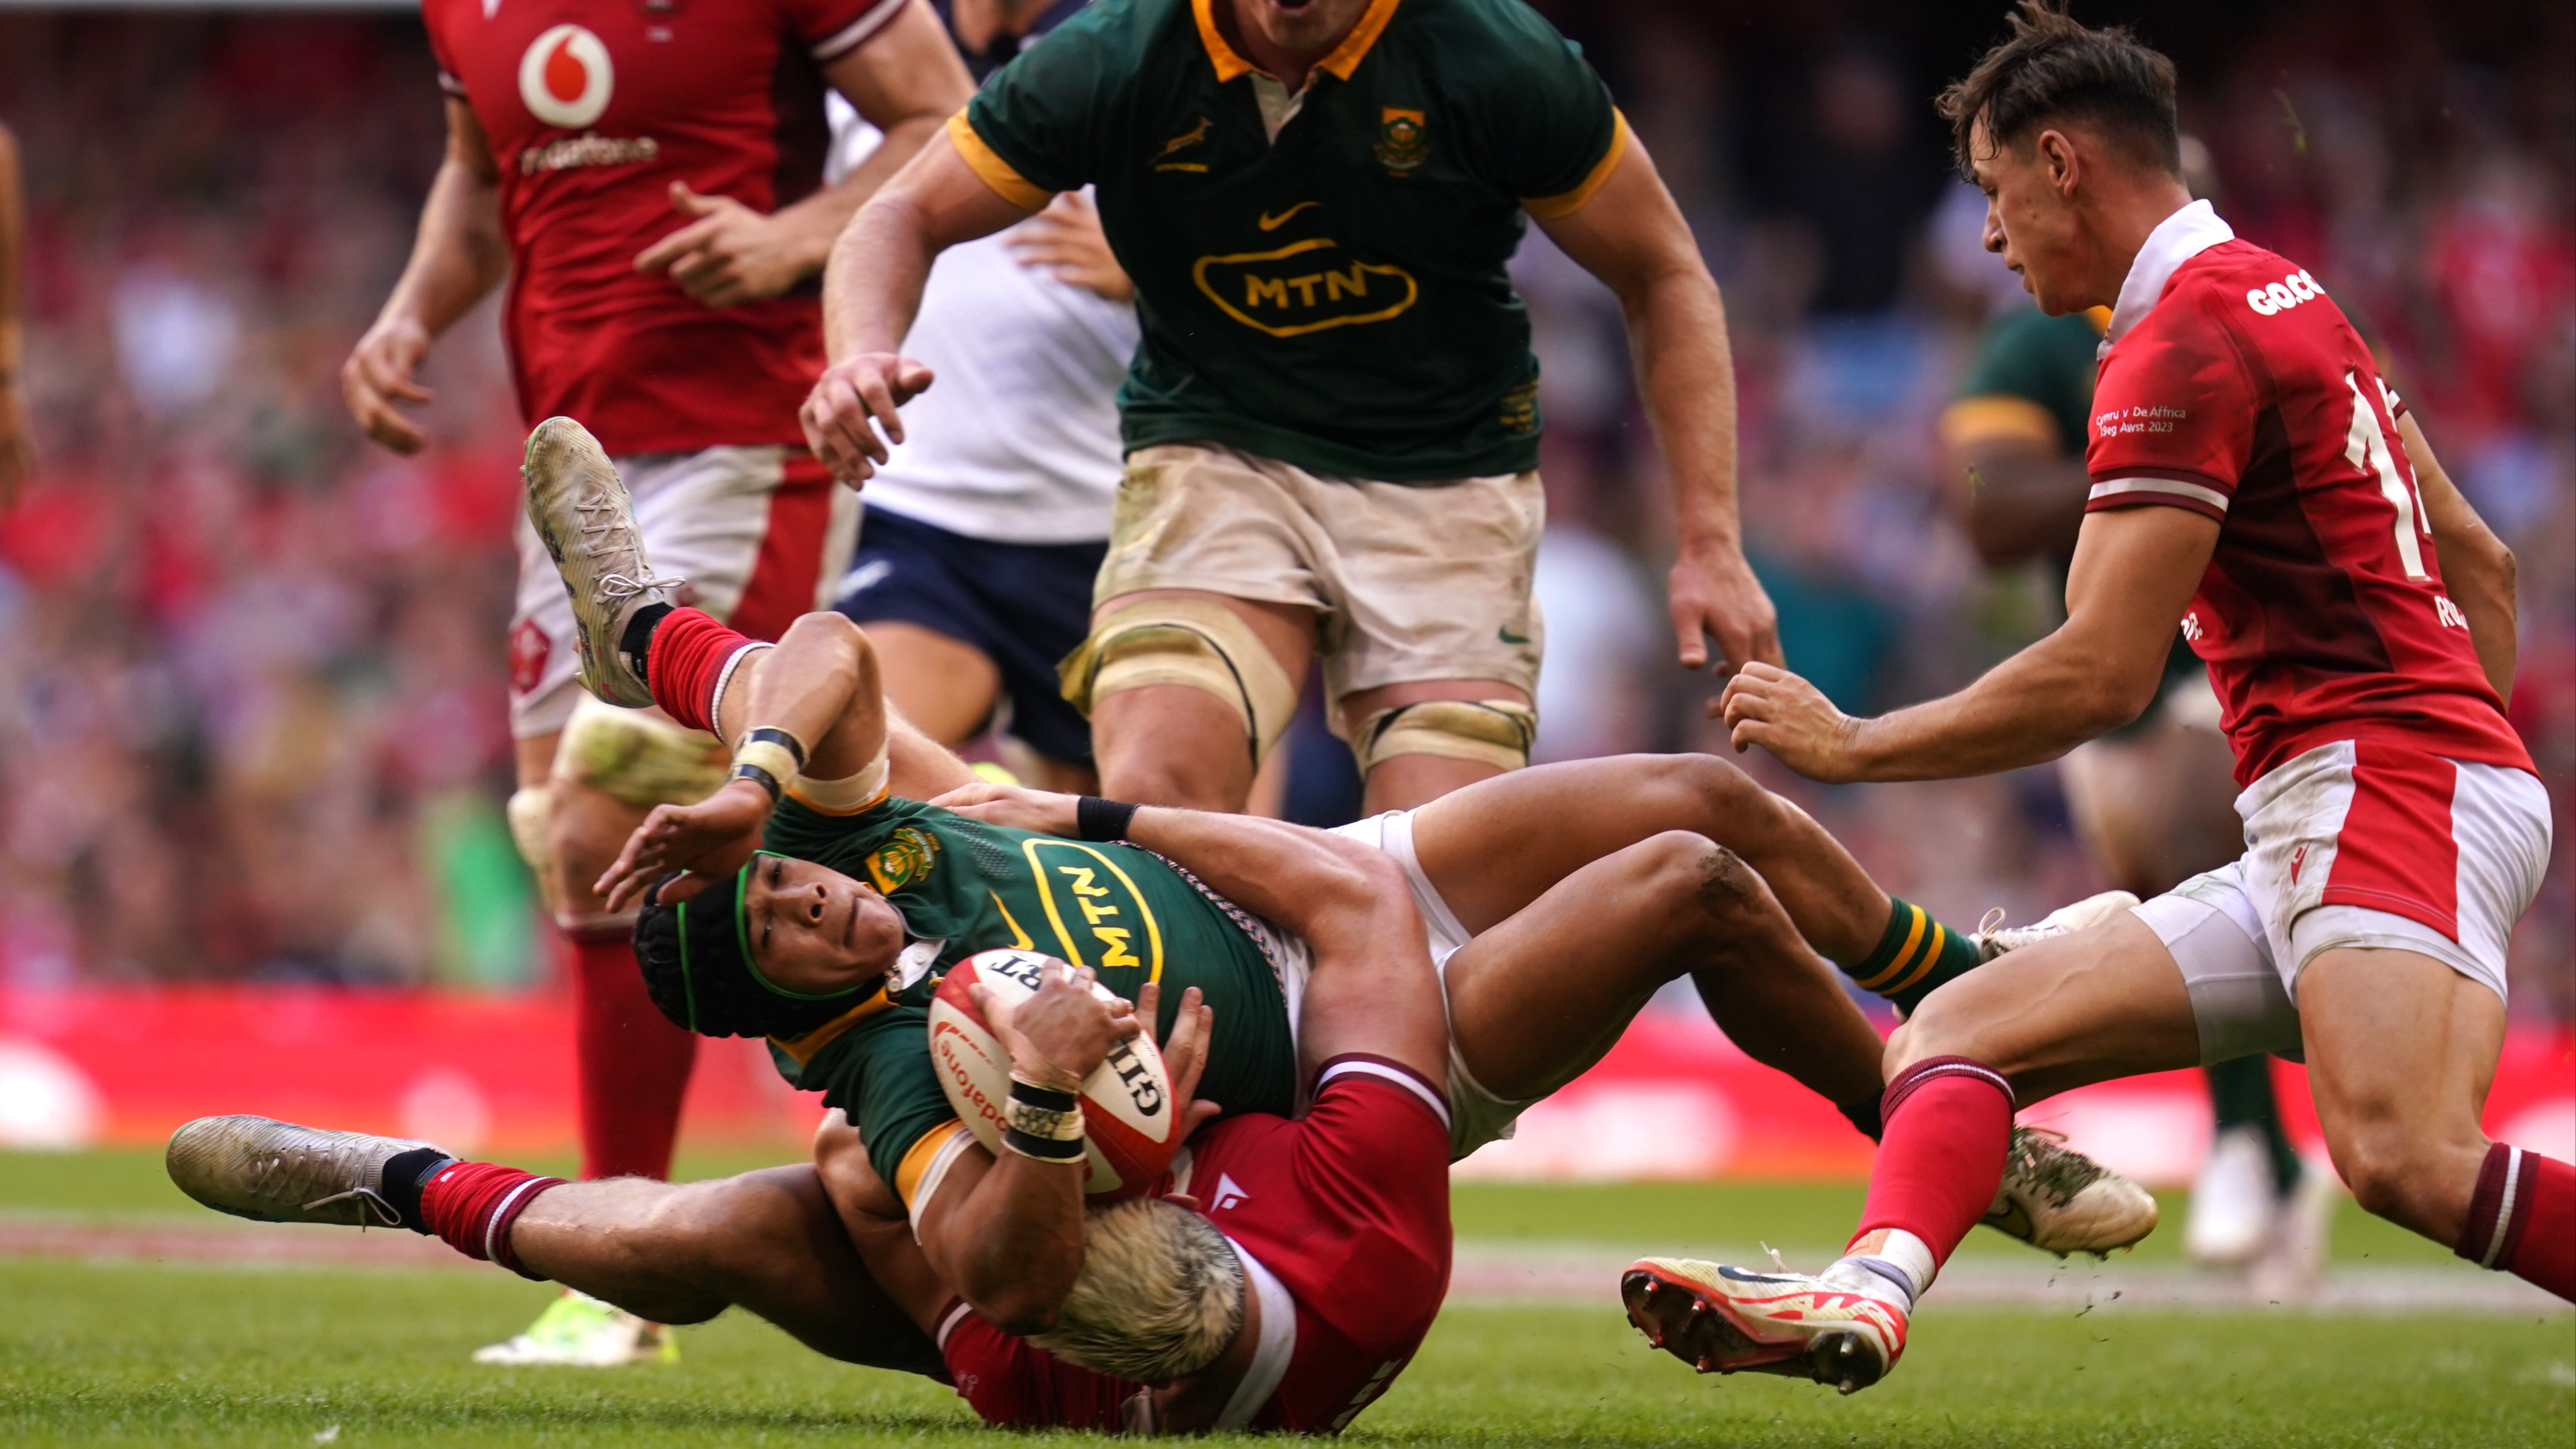 Wales suffer 52-16 defeat to South Africa in their World Cup warm-up match in Cardiff ITV News Wales